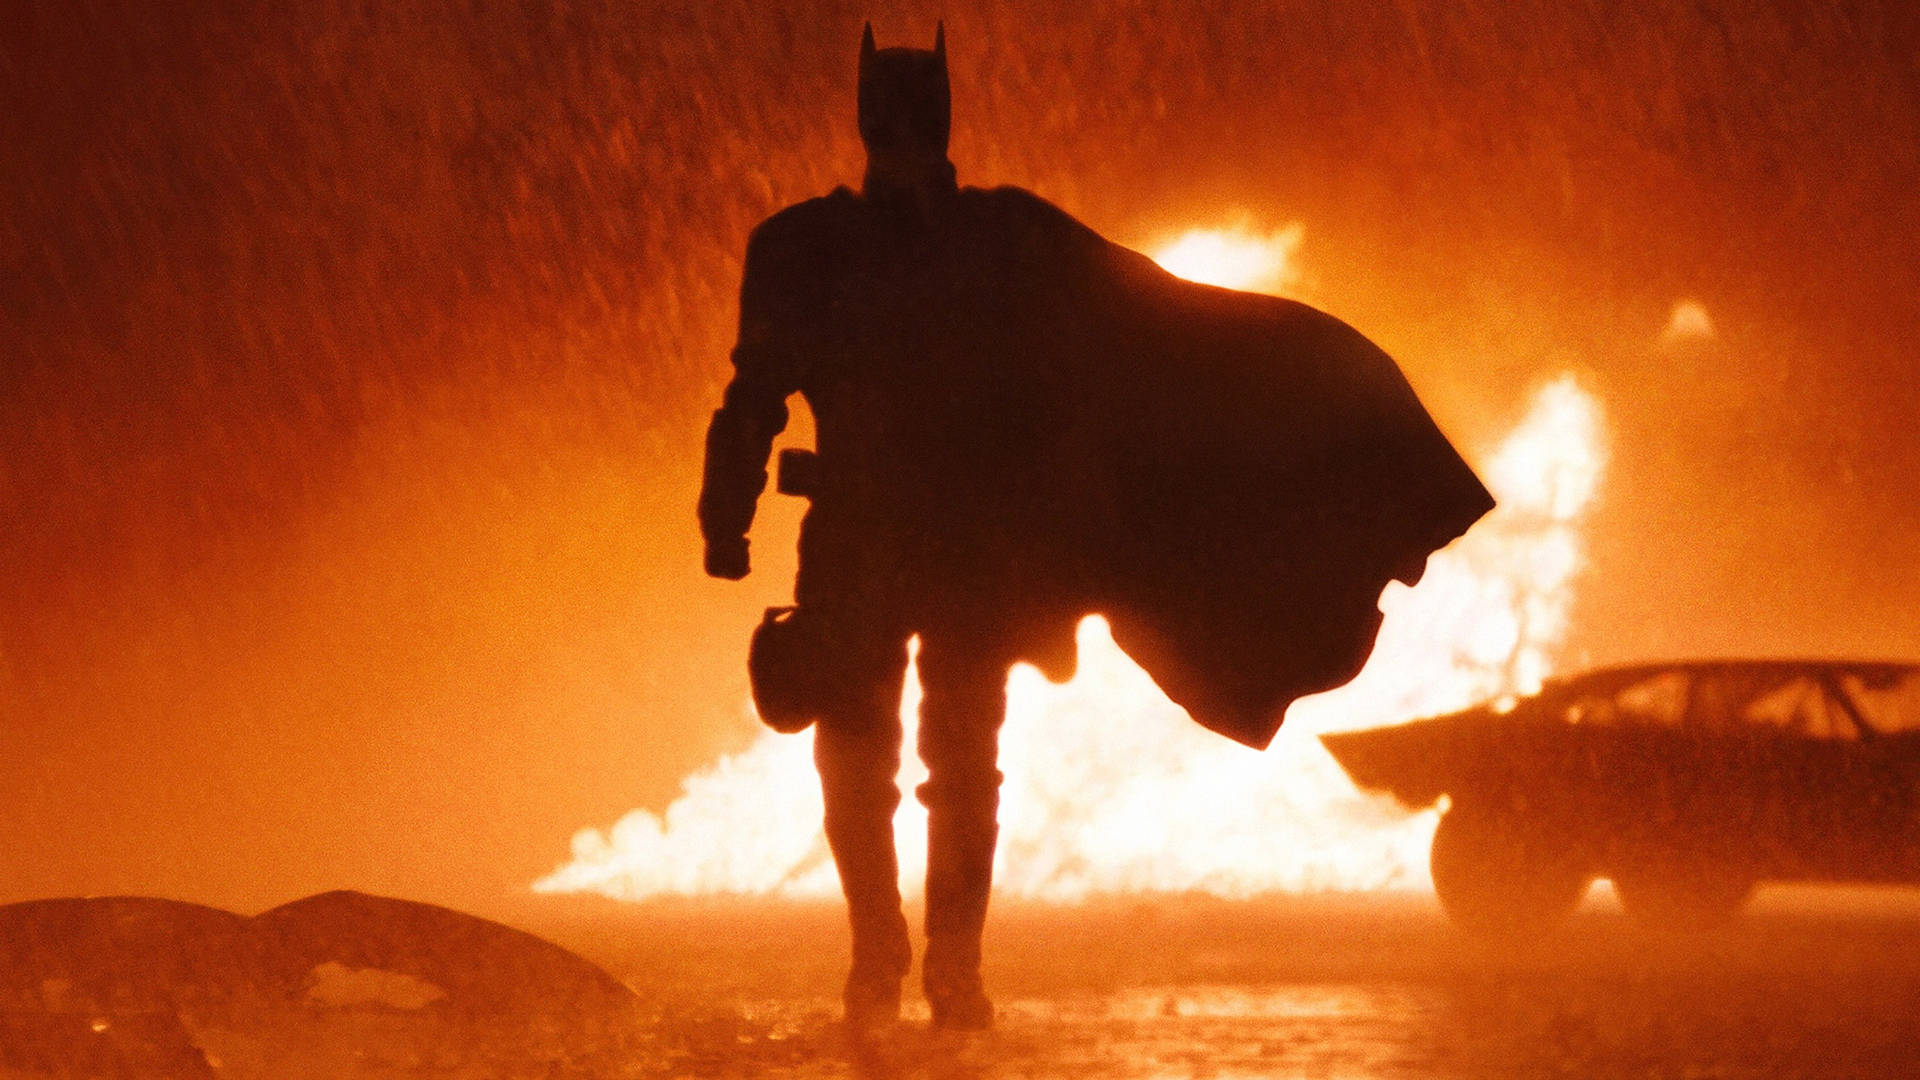 The Batman Walking Away From Flames Background